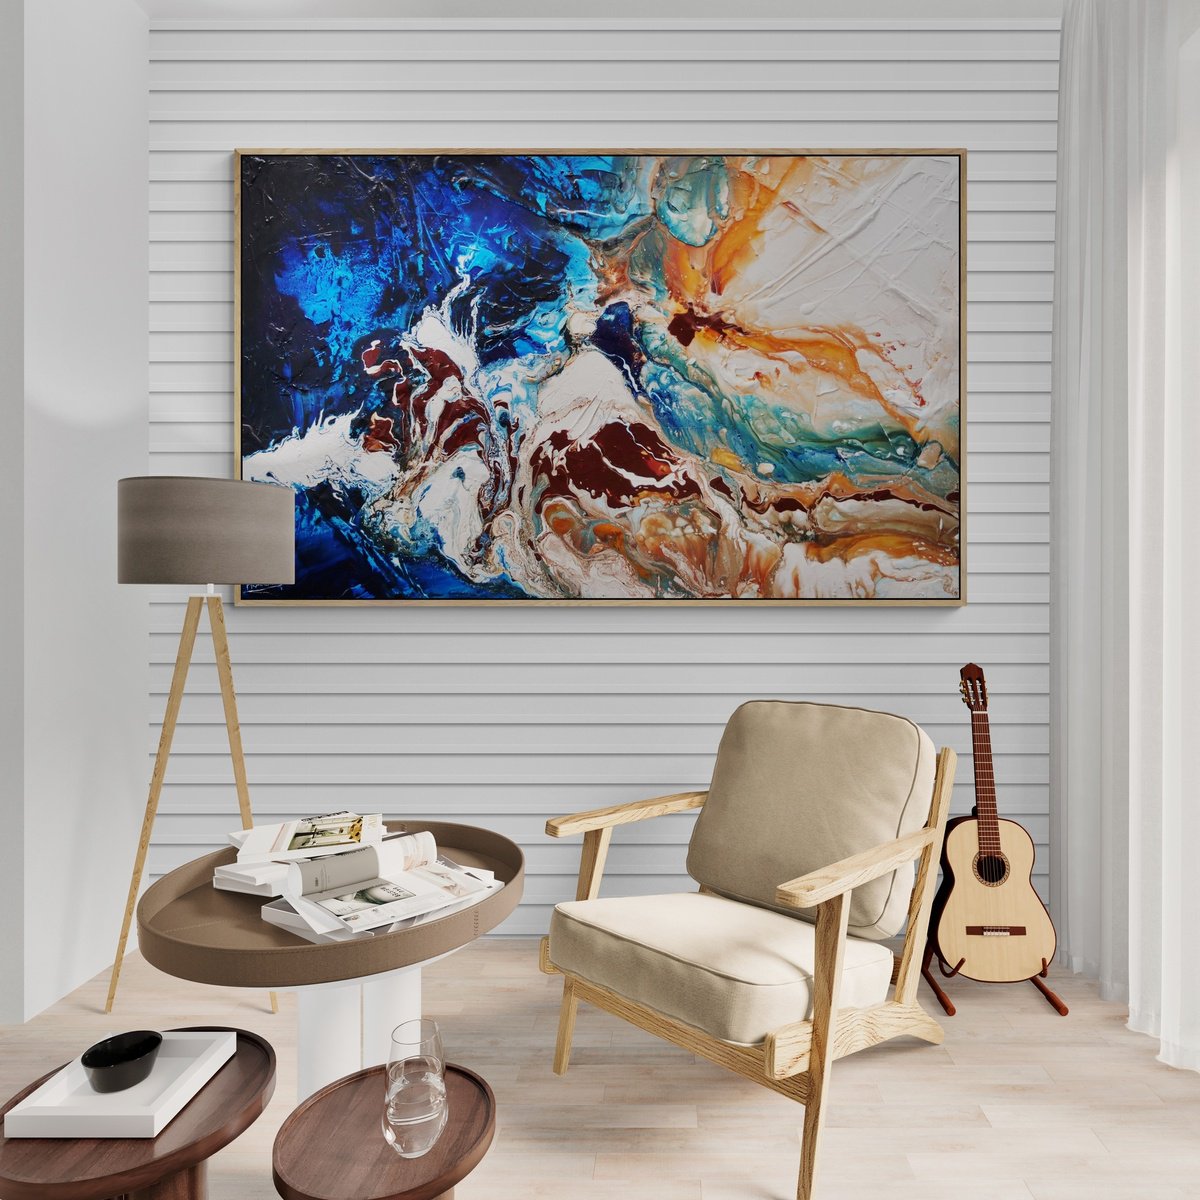 Journey 160cm x 100cm Textured Abstract Art by Franko